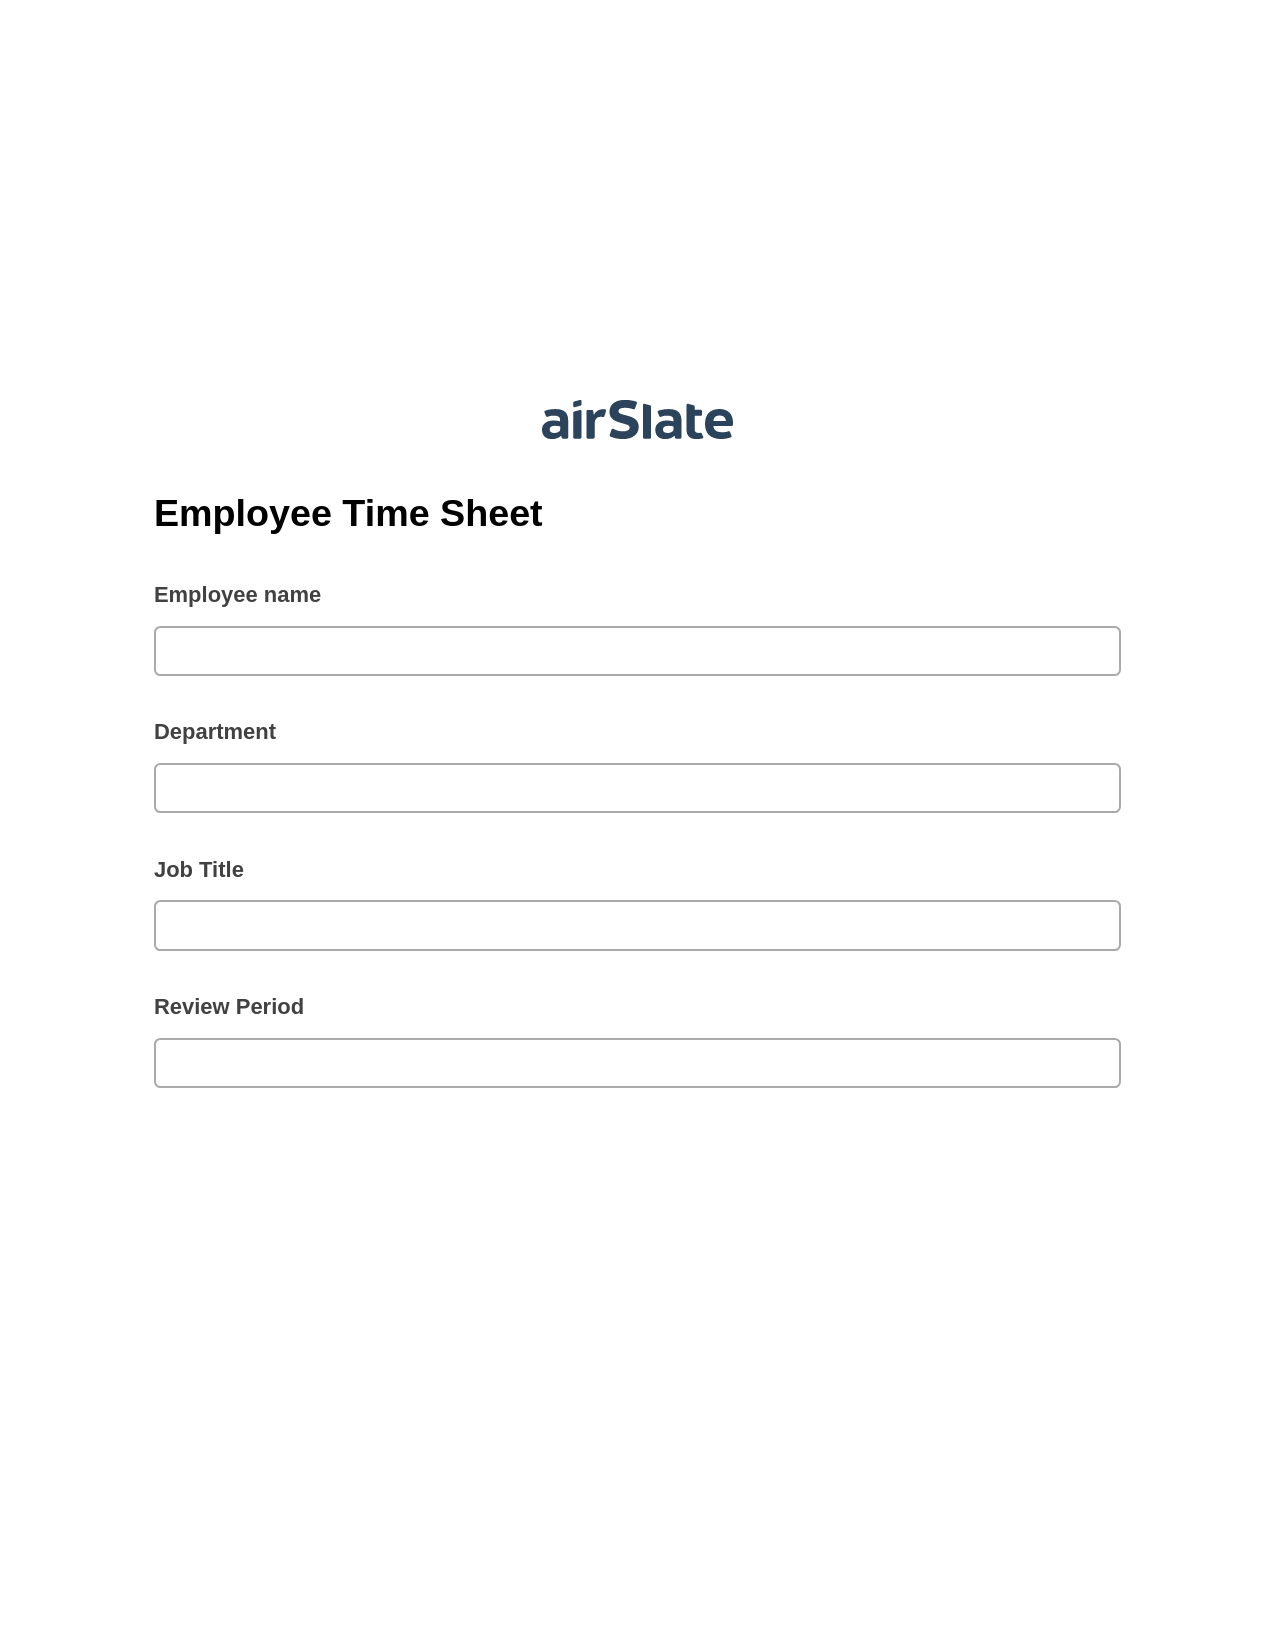 Employee Time Sheet Pre-fill from Litmos bot, Create slate addon, Export to Excel 365 Bot